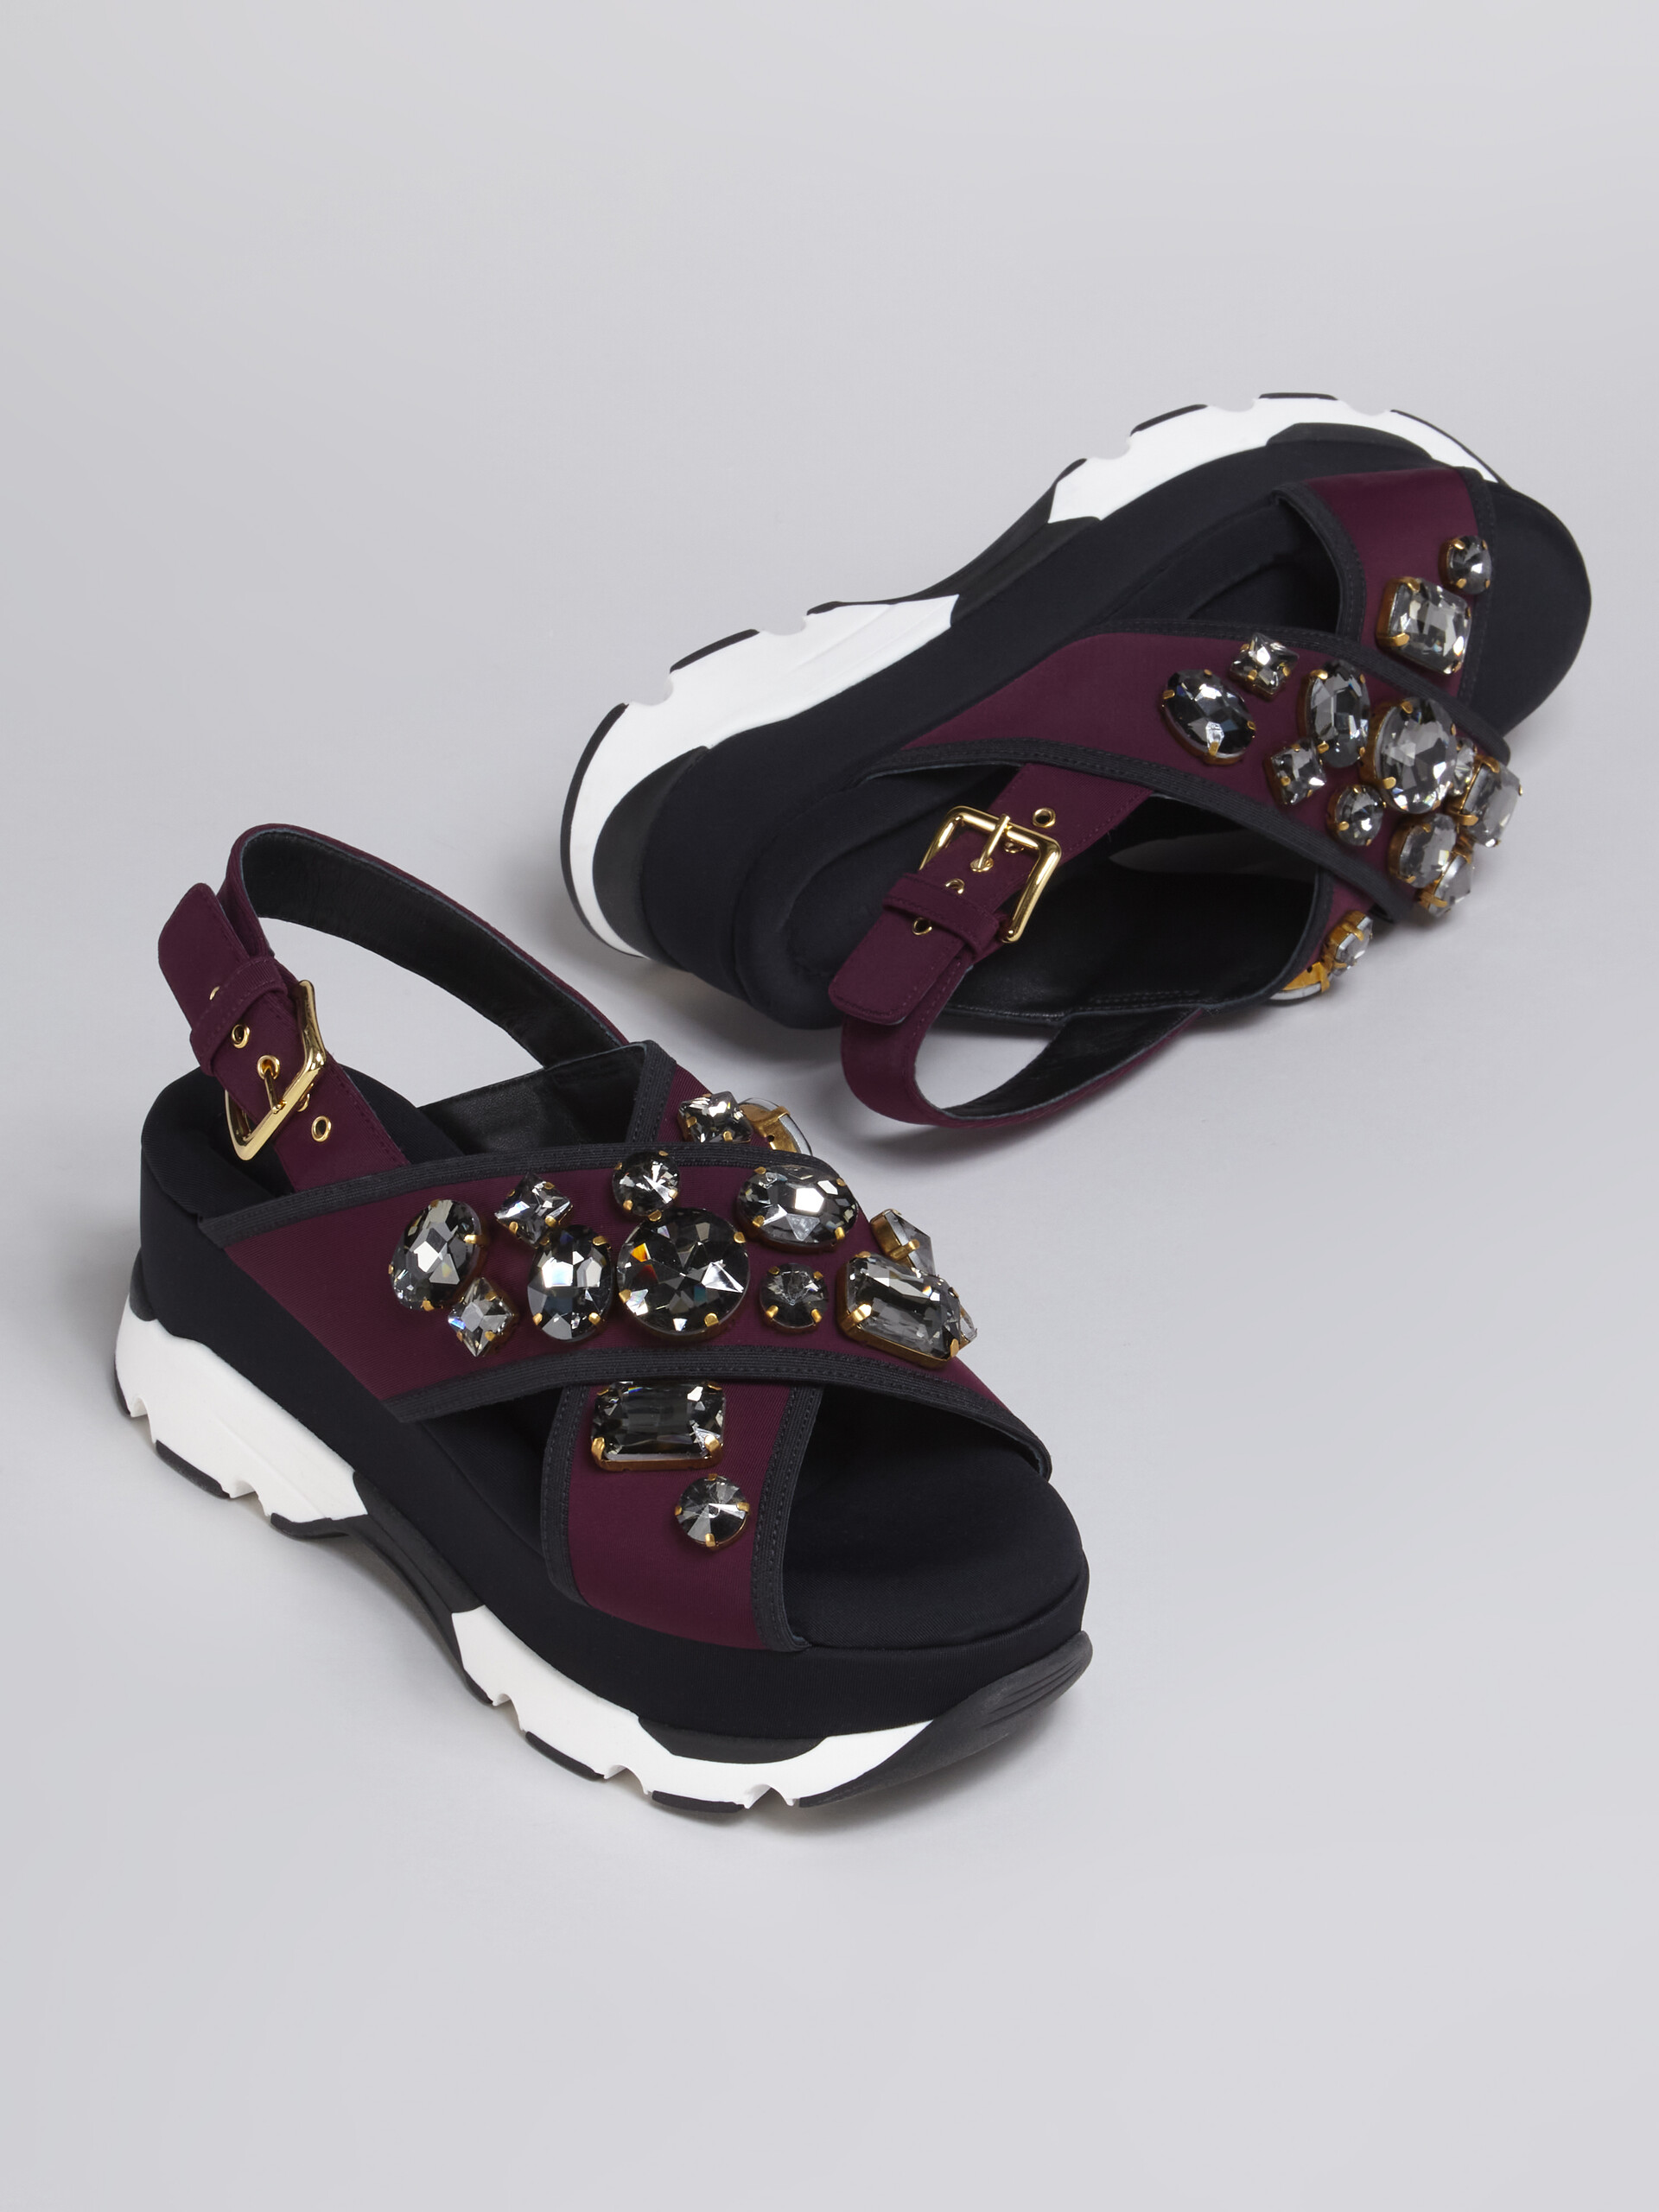 Burgundy and black wedge in technical fabric - Sandals - Image 5